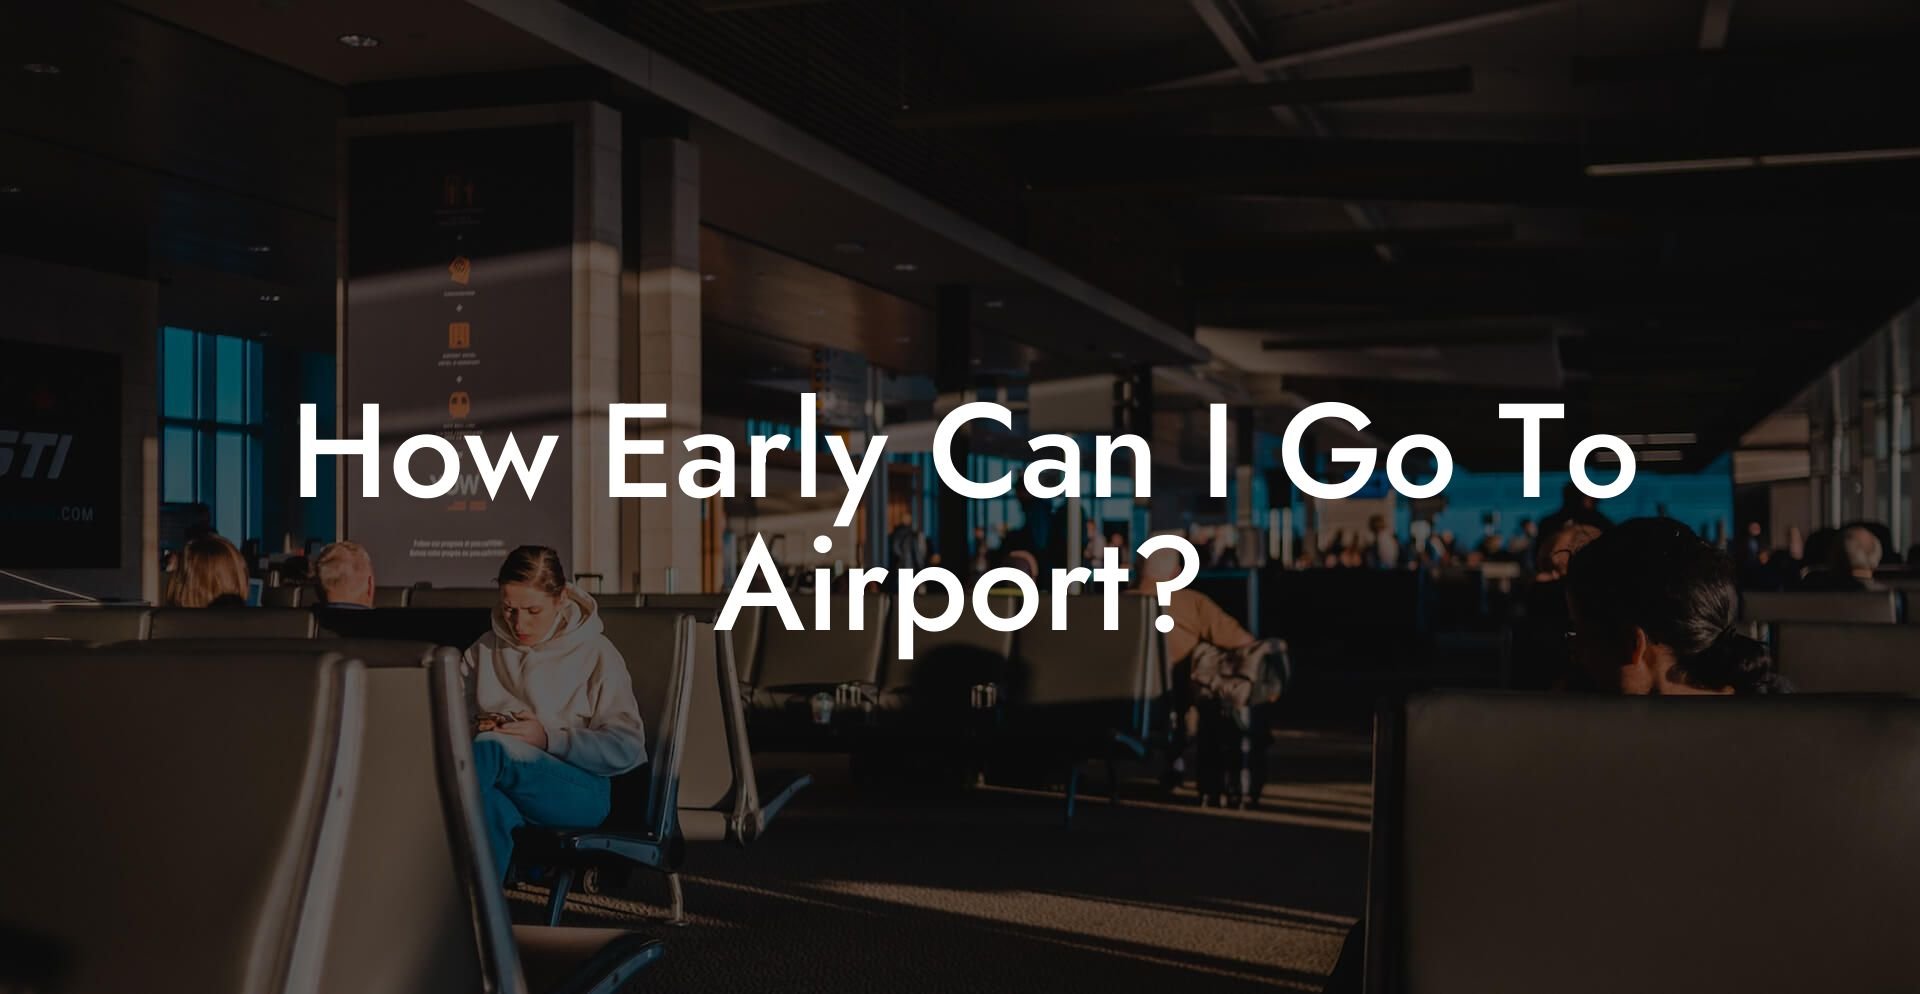 How Early Can I Go To Airport?